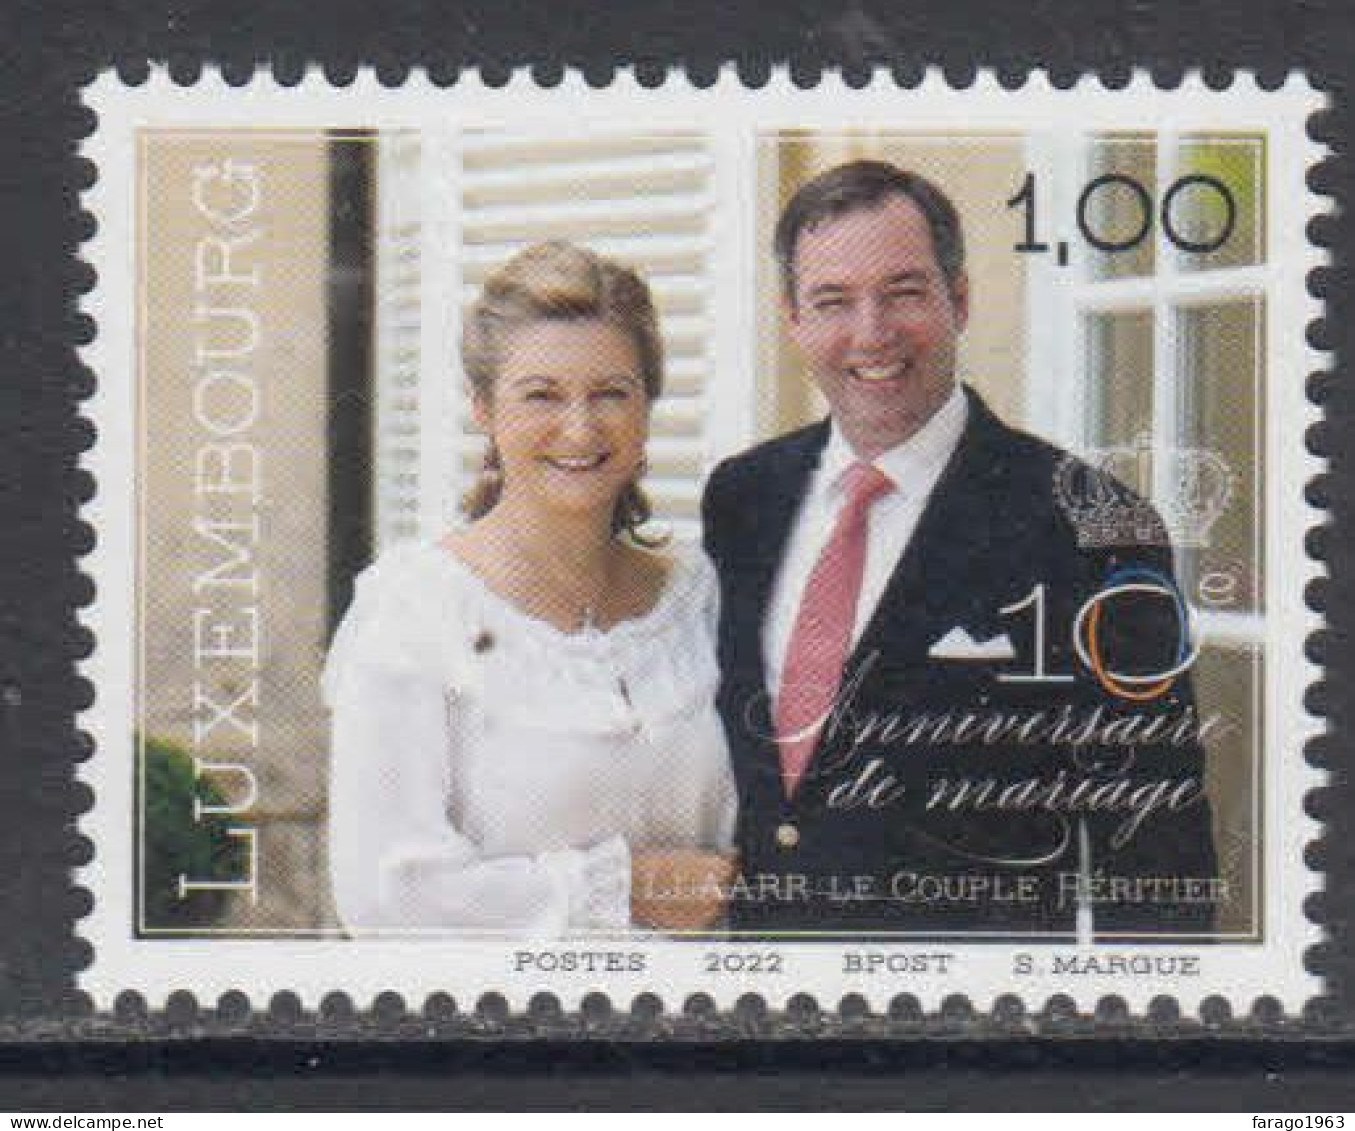 2022 Luxembourg Wedding Anniversary Royalty Complete Set Of 1 MNH  @ BELOW FACE VALUE - Unused Stamps